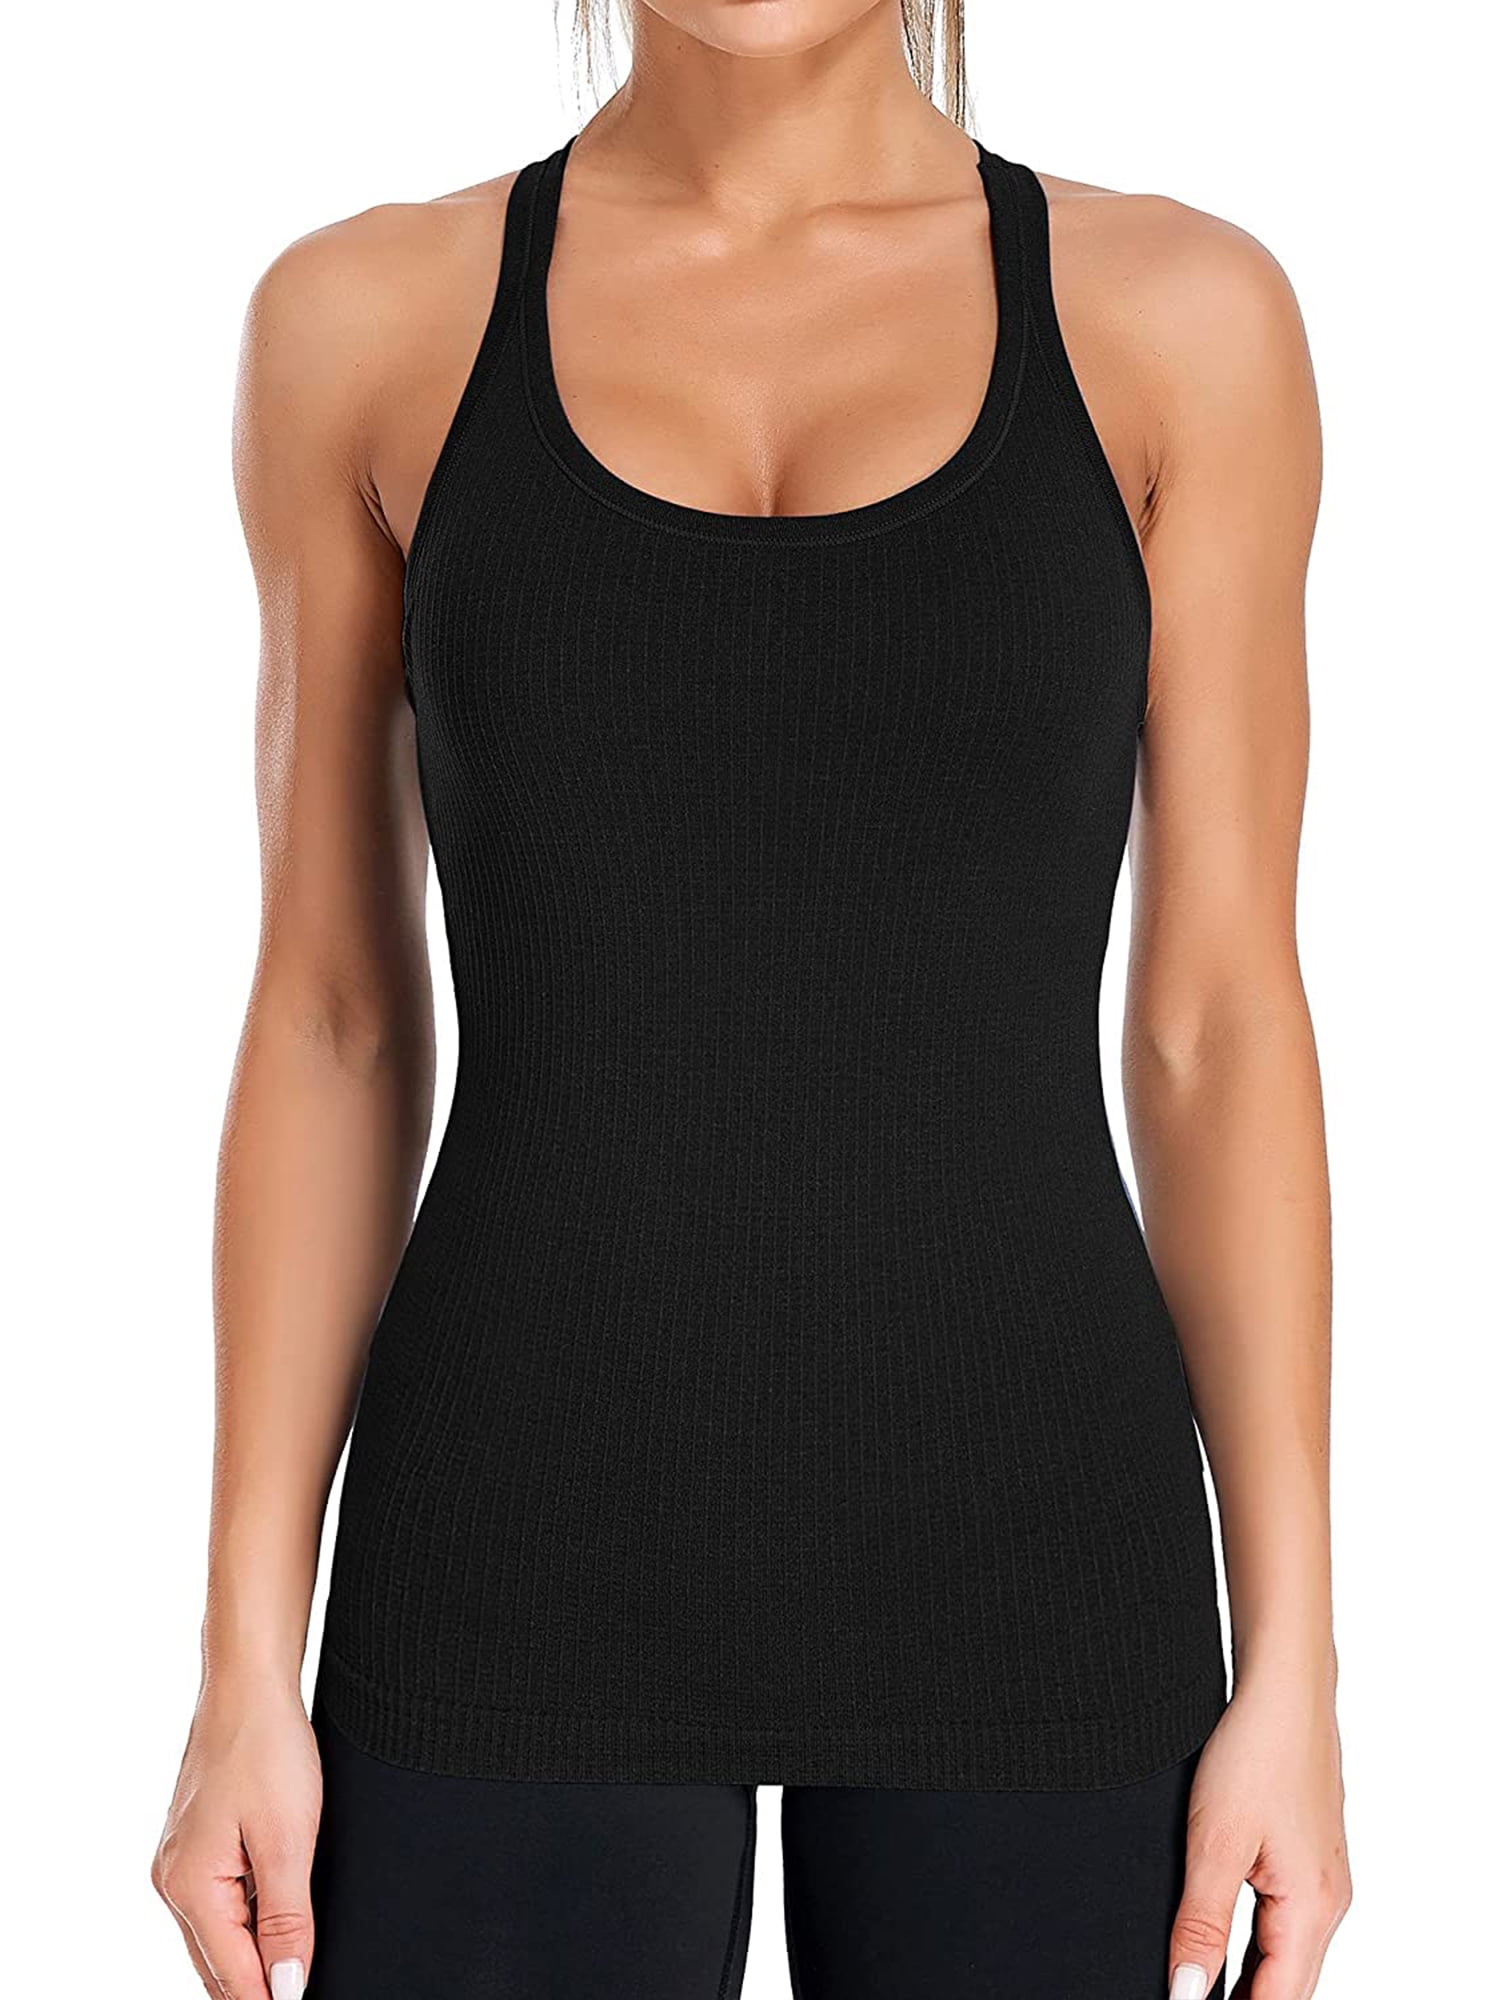  Nude Racerback Bra Work Out Tank Tops for Women with